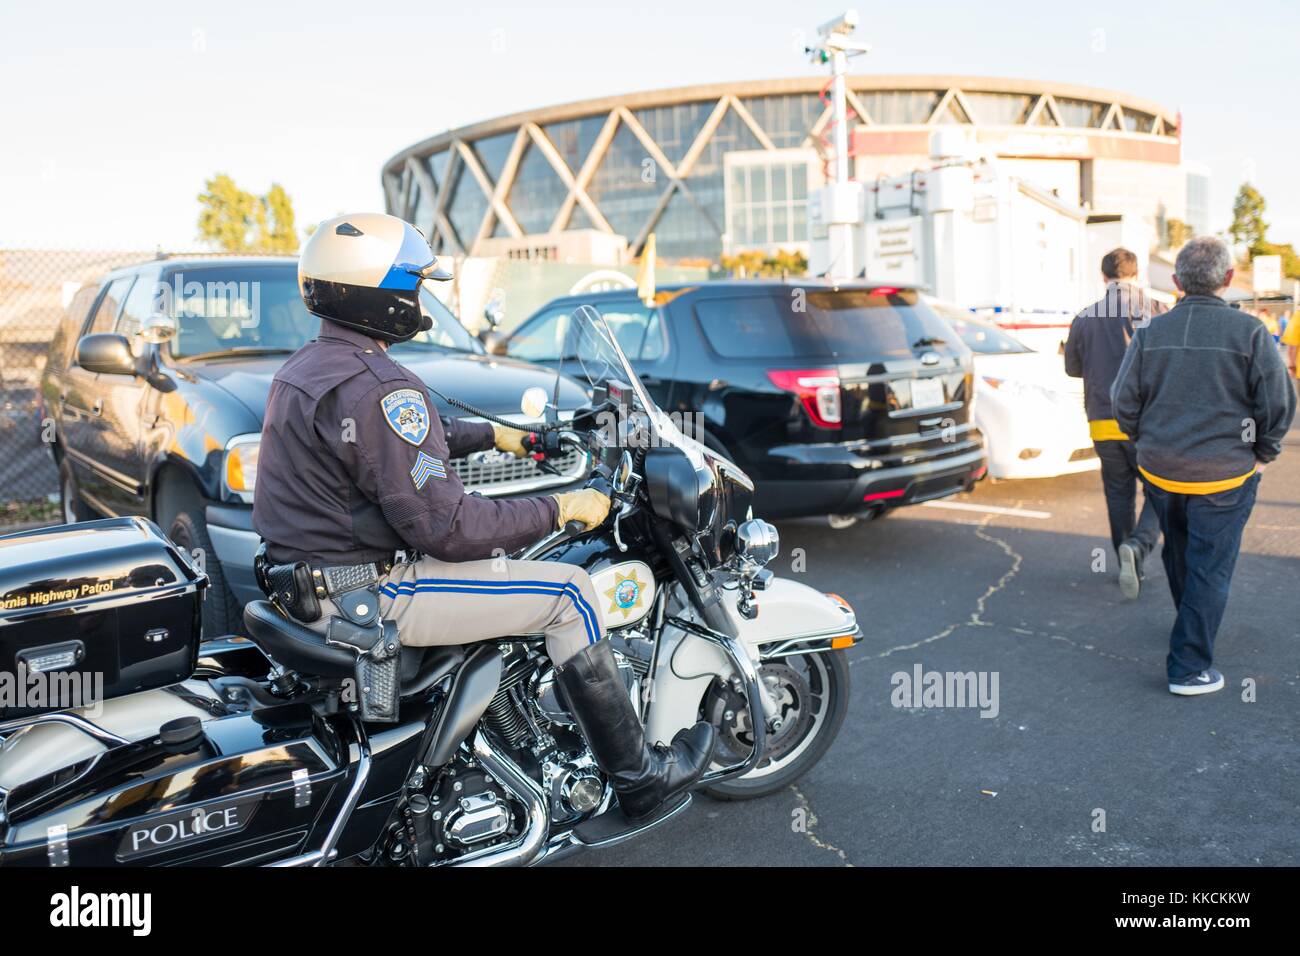 outside-oracle-arena-an-oakland-police-department-motorcycle-police-KKCKKW.jpg